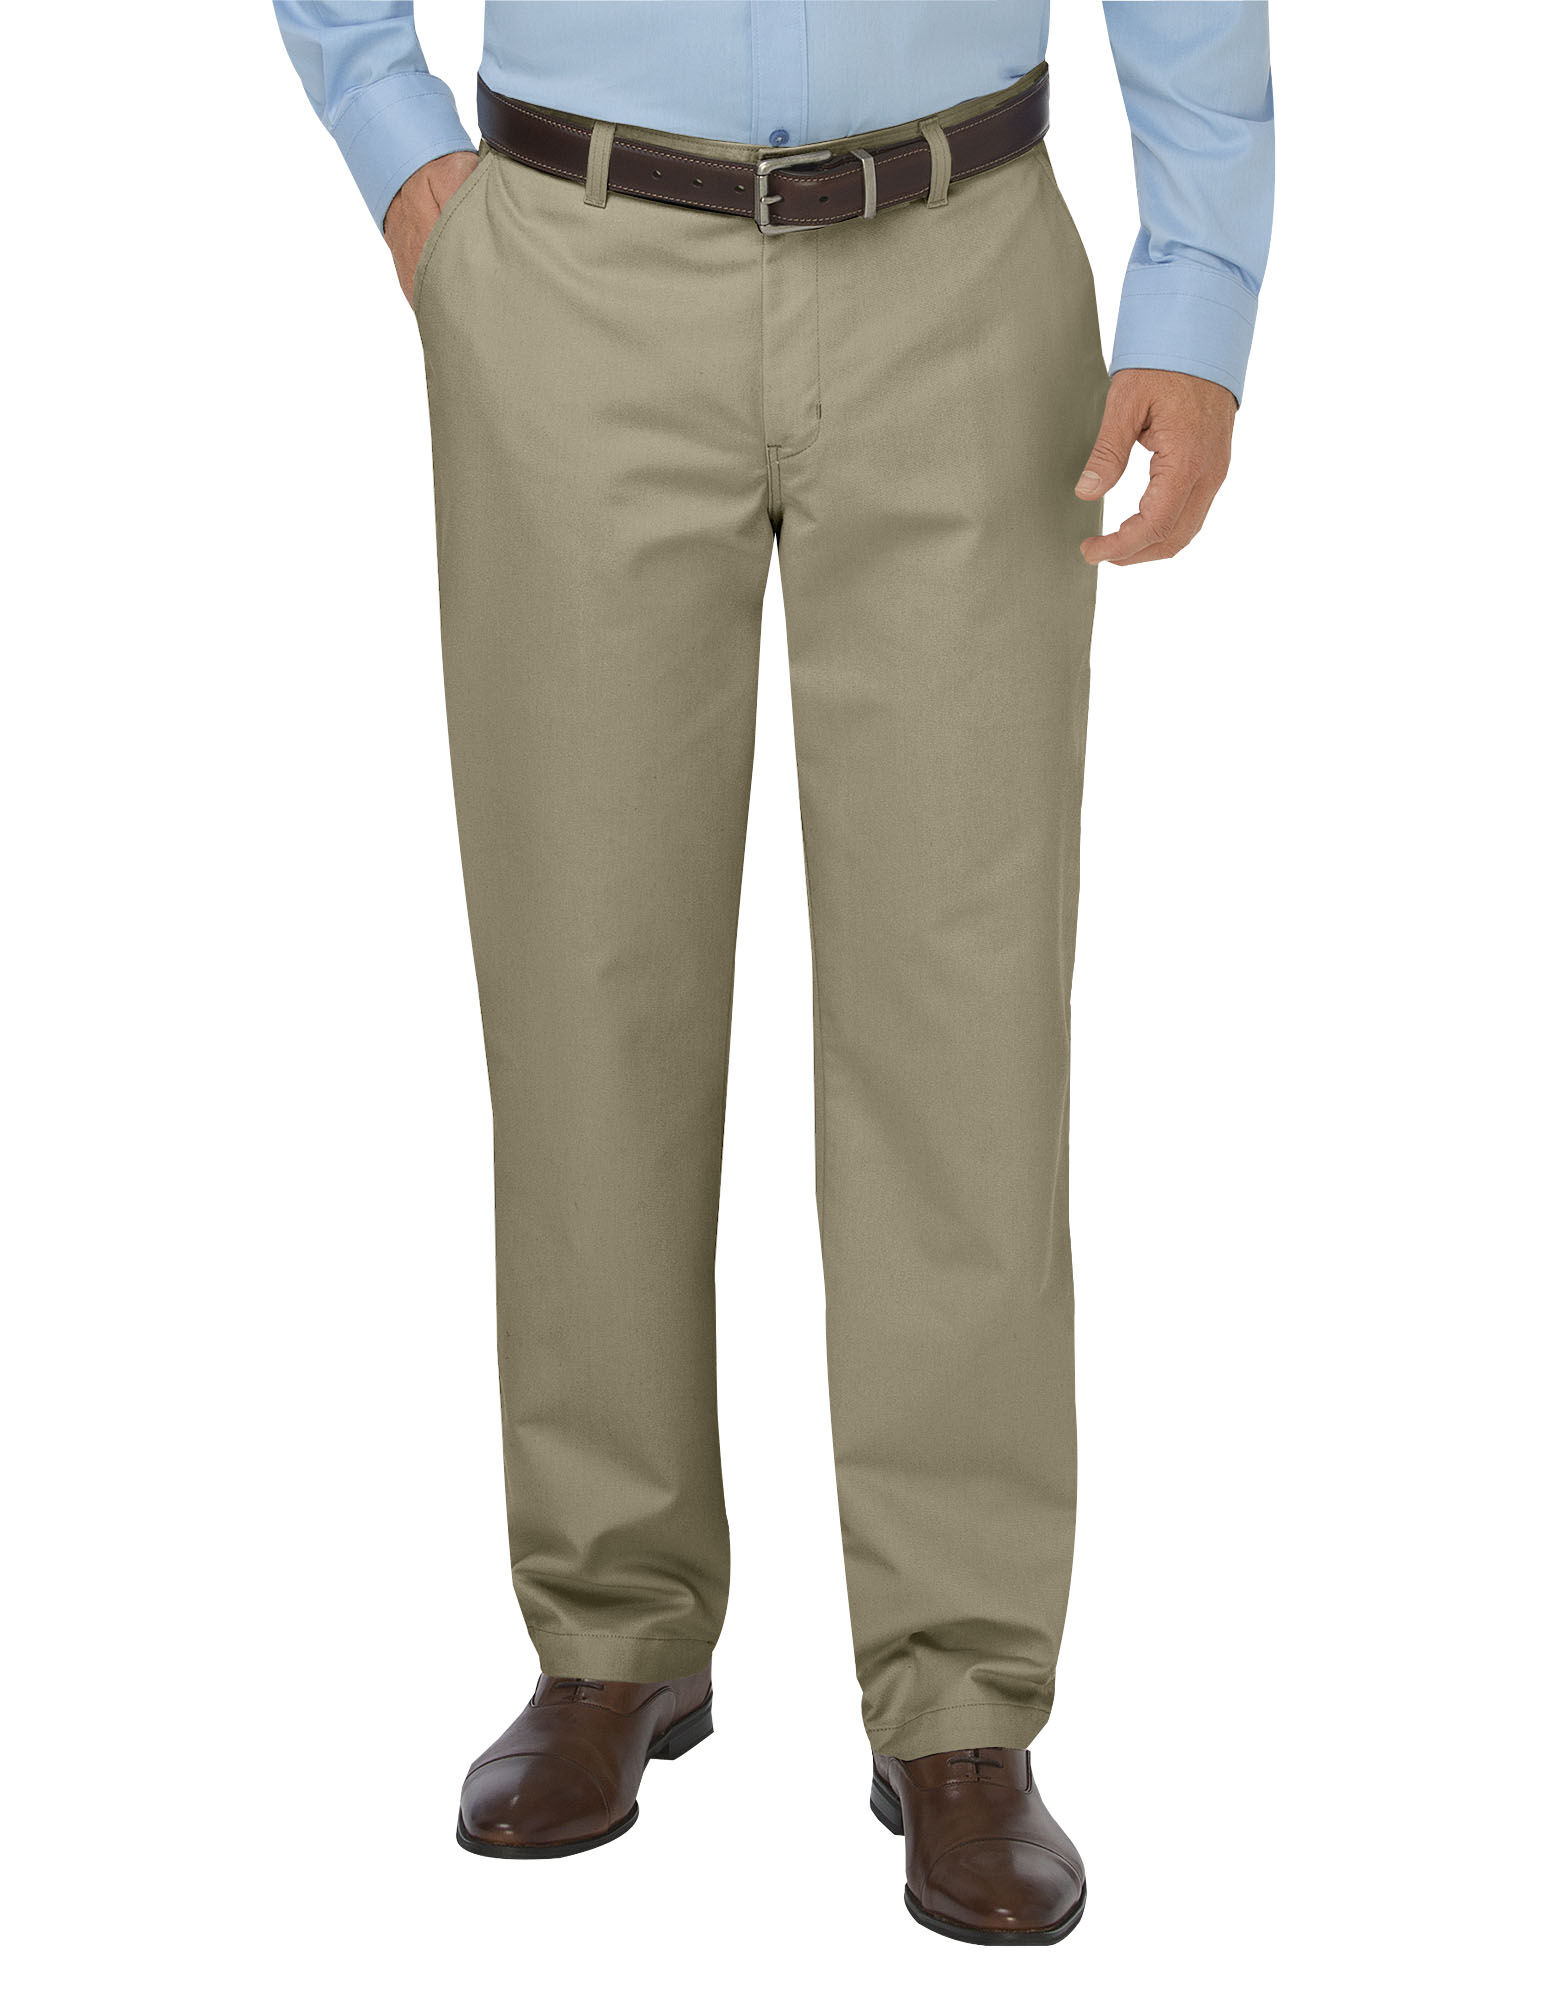 Khaki Pants for Him | Relaxed Fit Straight Leg | Dickies